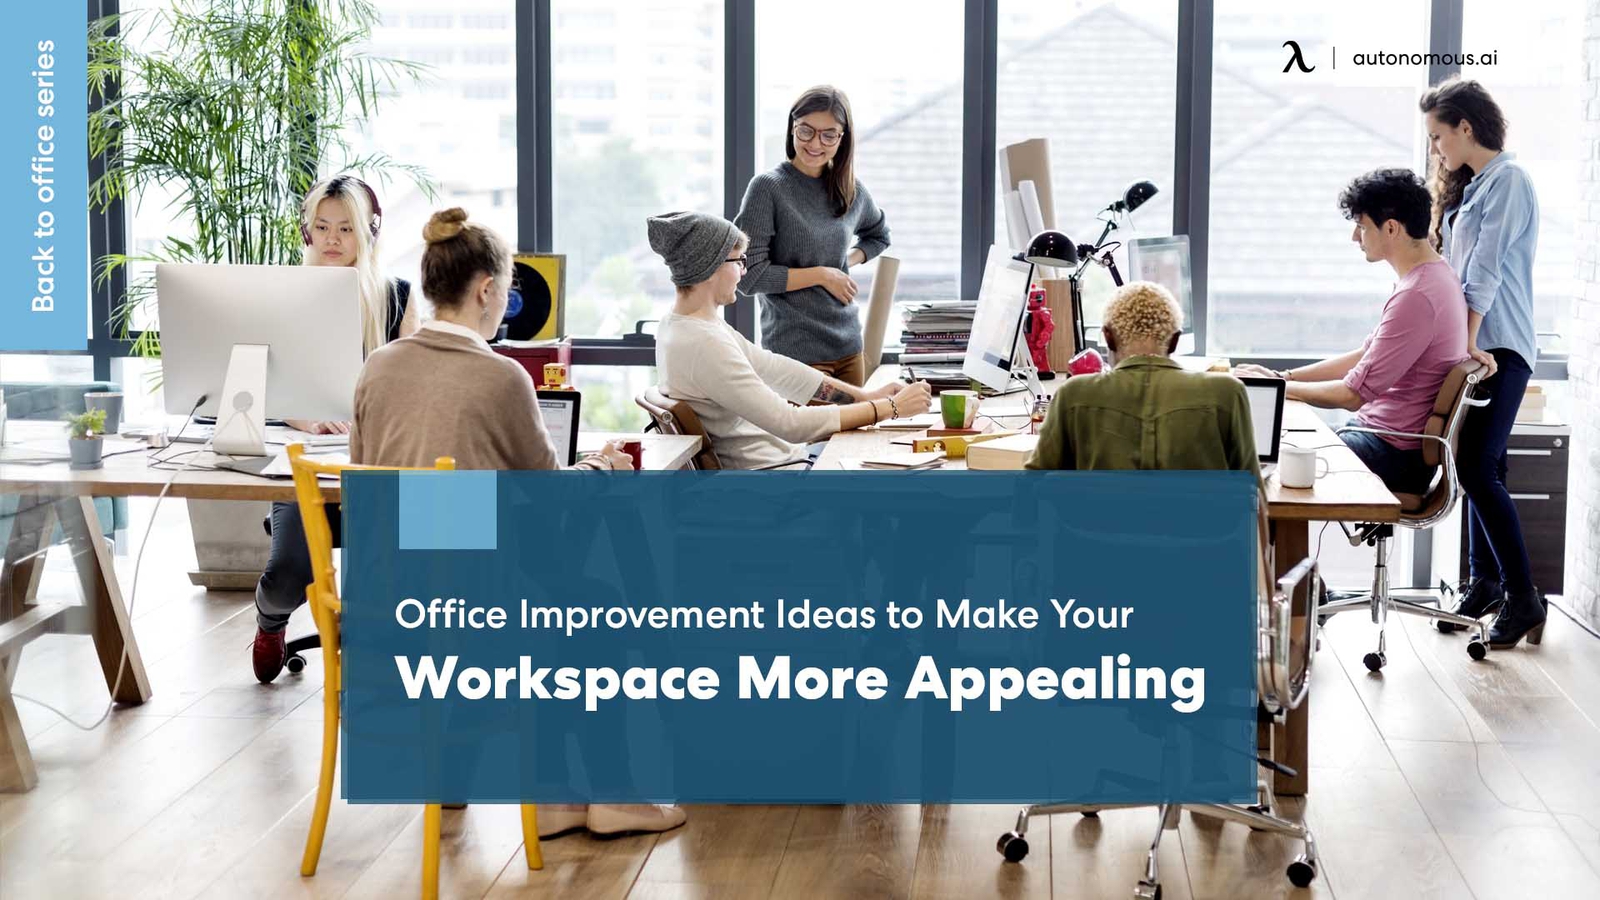 Office Improvement Ideas to Make Your Workspace More Appealing